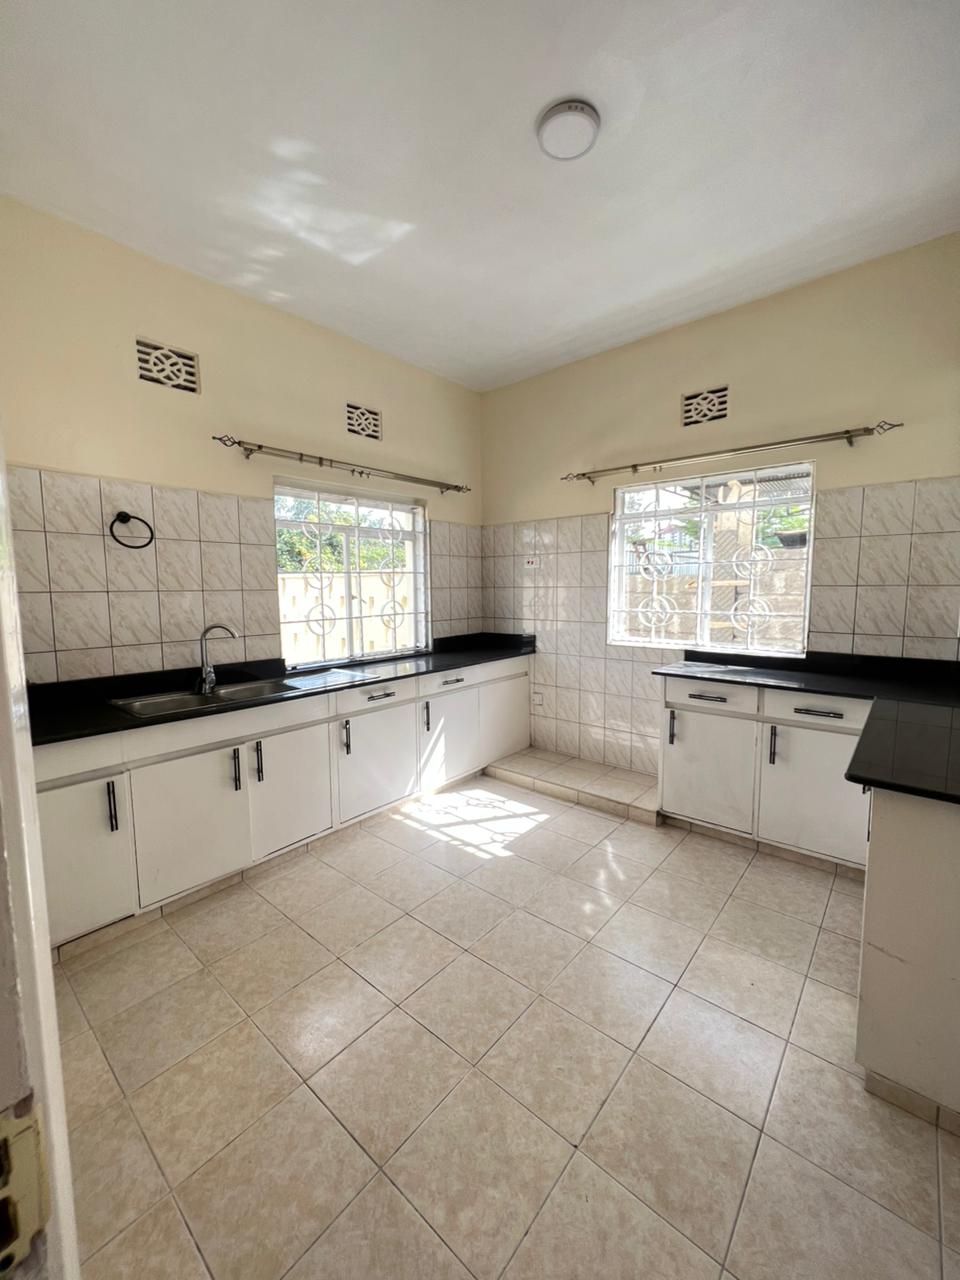 Spacious Modern 3 bedroom Maisonette to let in Kileleshwa, Nairobi. Gated community. Few units in the compound. DSQ. Rent 150,000Musilli Homes Pam Golding